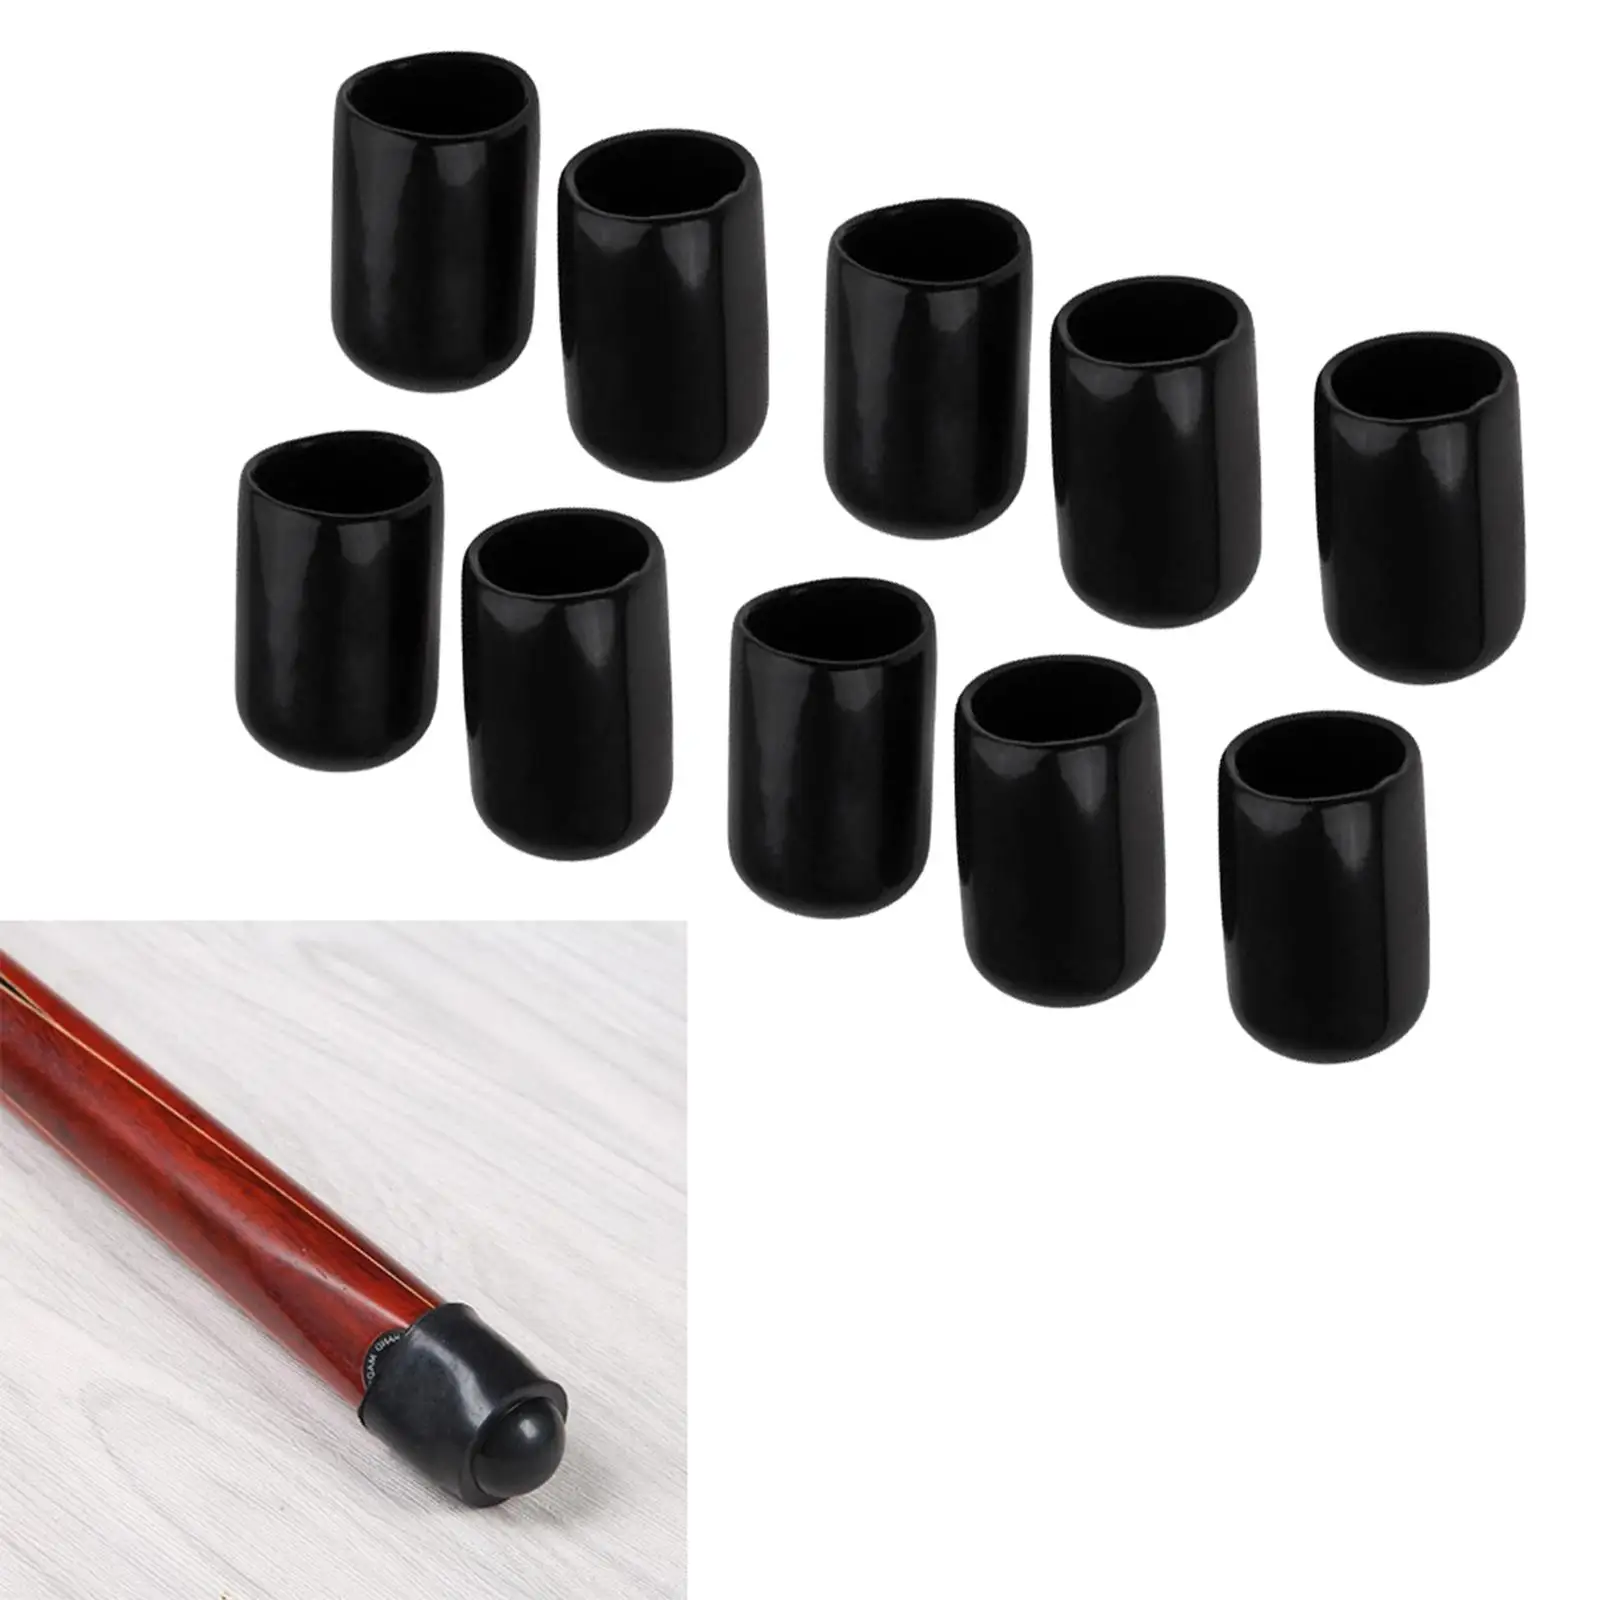 10x Pool Cue Tips Cover Durable 10mm Shockproof Black Billiards Cues Stick Protection Cover for Snooker Billiards Pool Cue